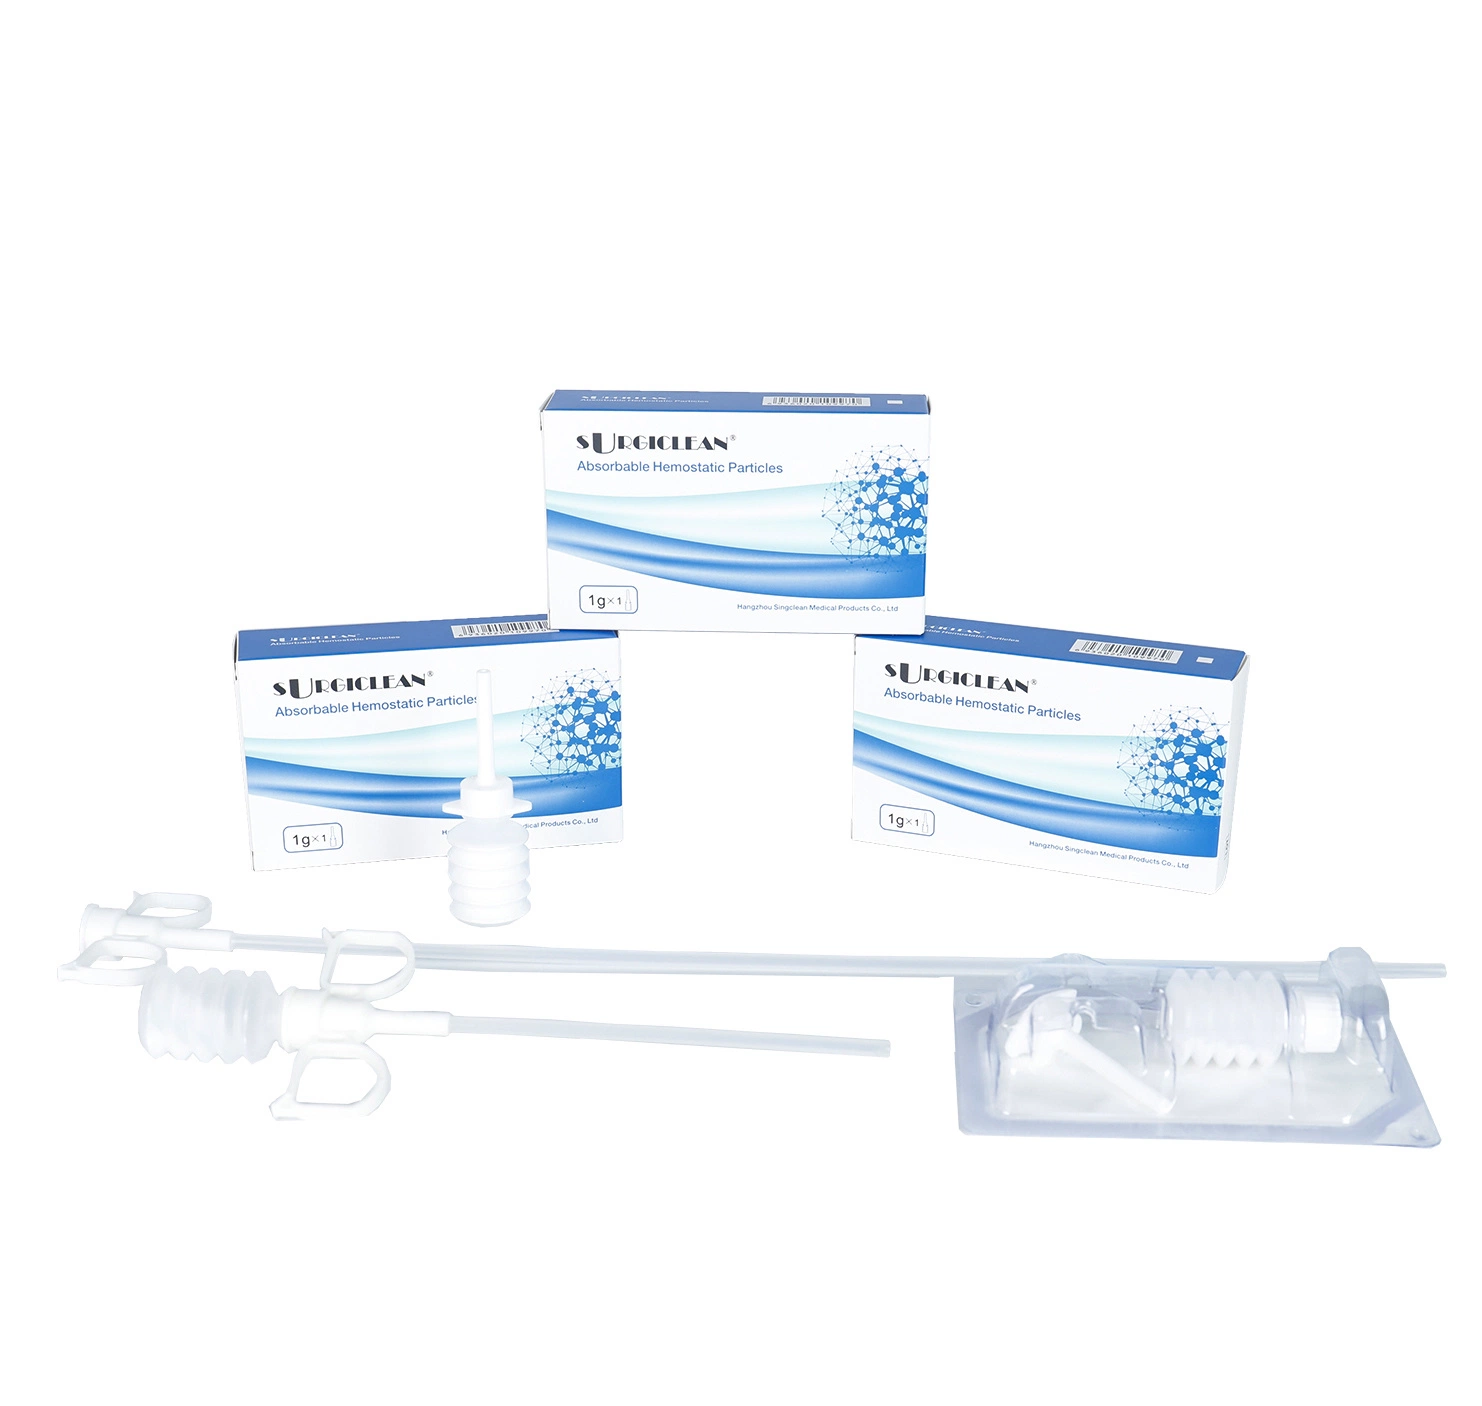 Absorbable Hemostatic Power Wound Dressing for Class III General Surgery Stop Bleeding